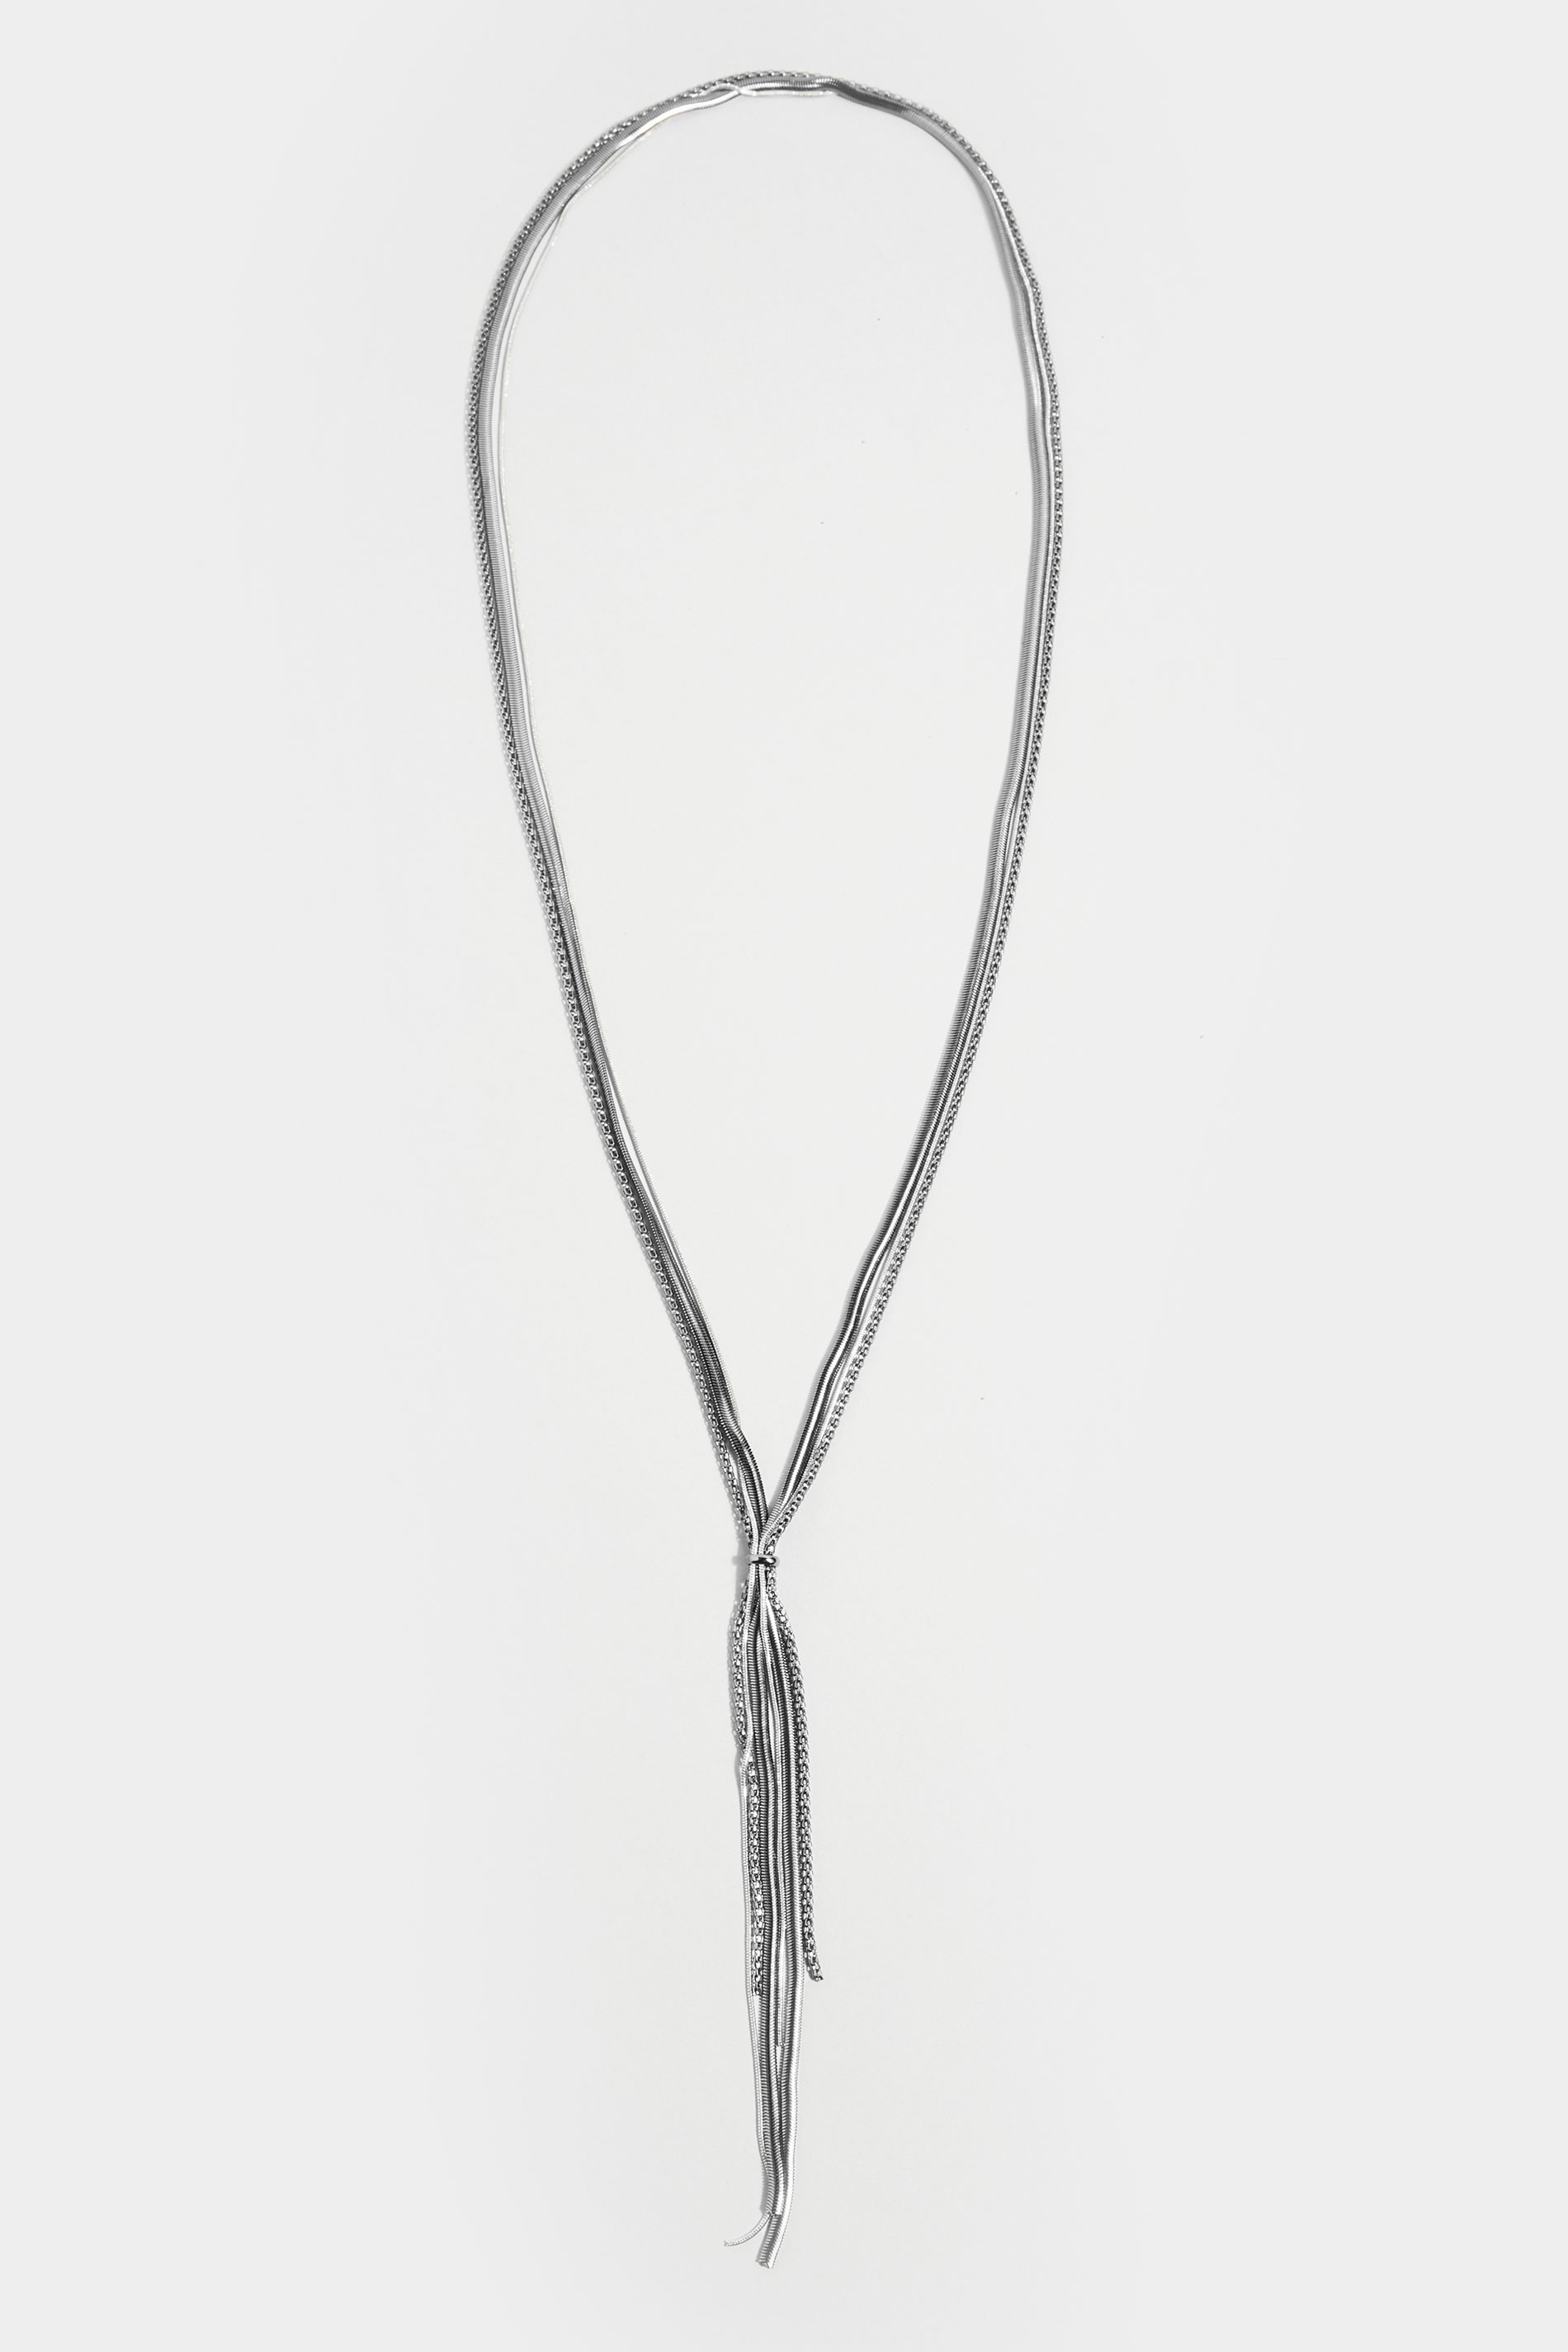 Silver & Black Tone Chain Knot Necklace_C.jpg